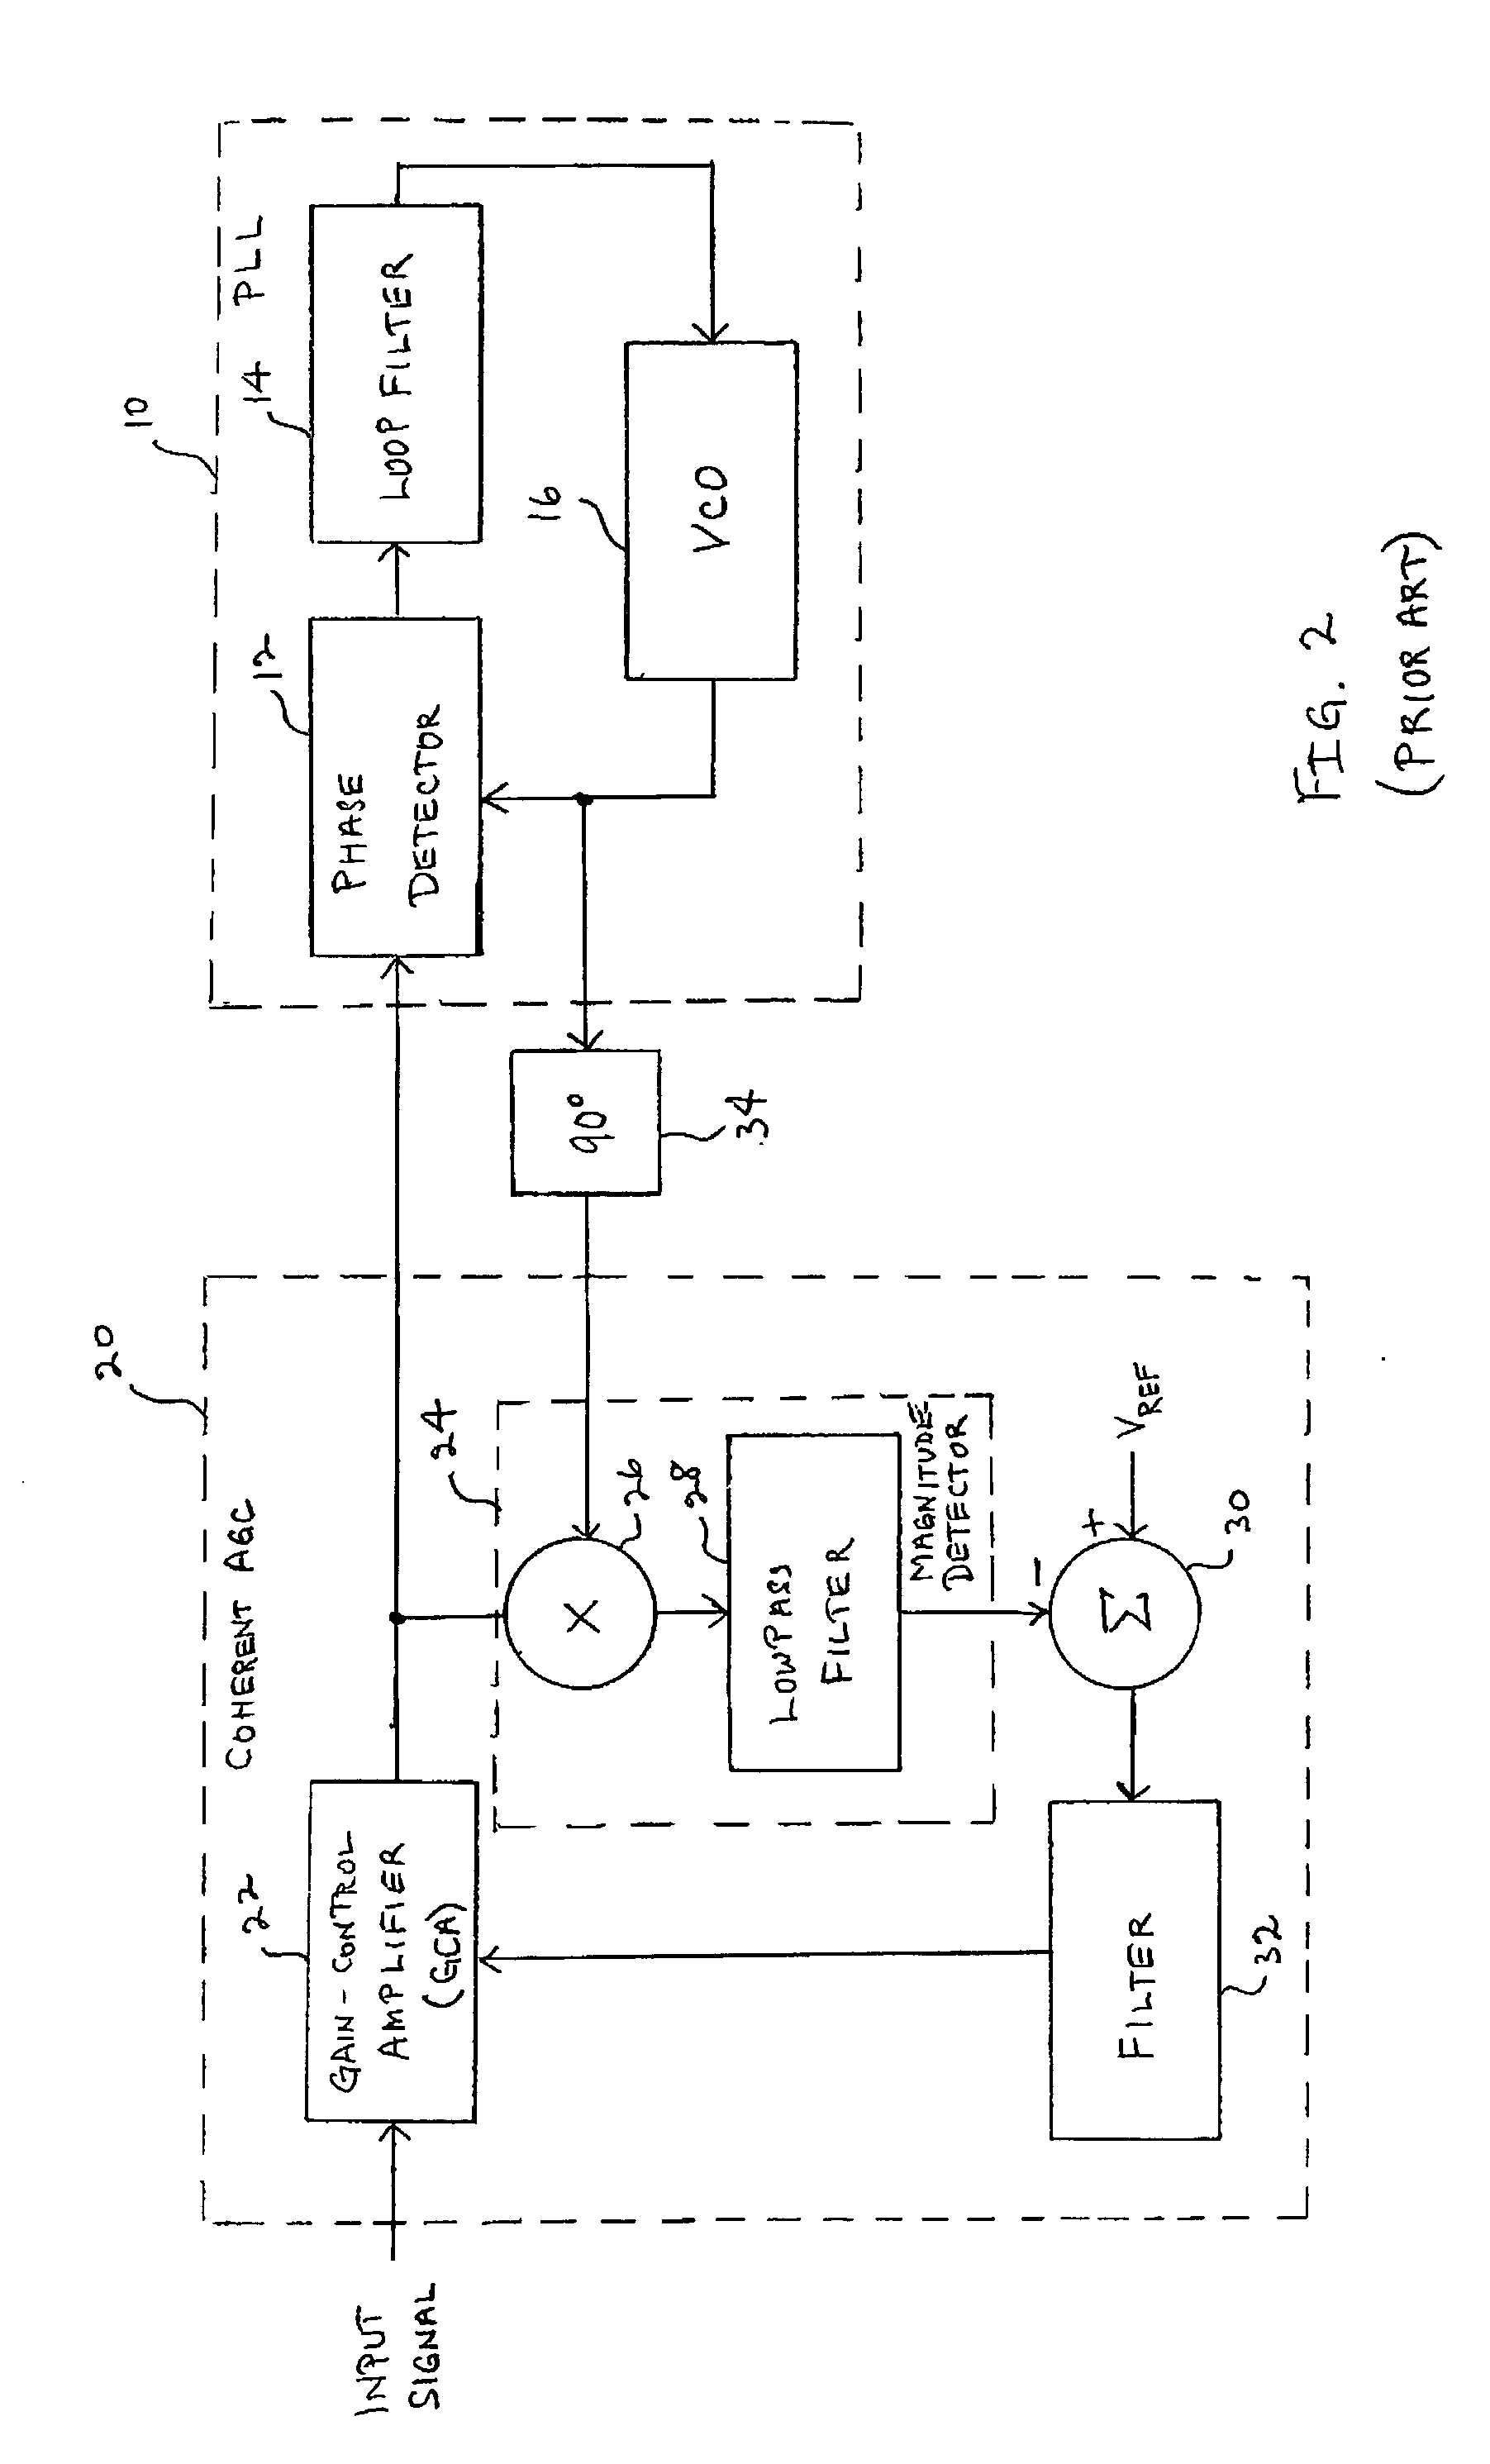 Apparatus and method for radio frequency tracking and acquisition